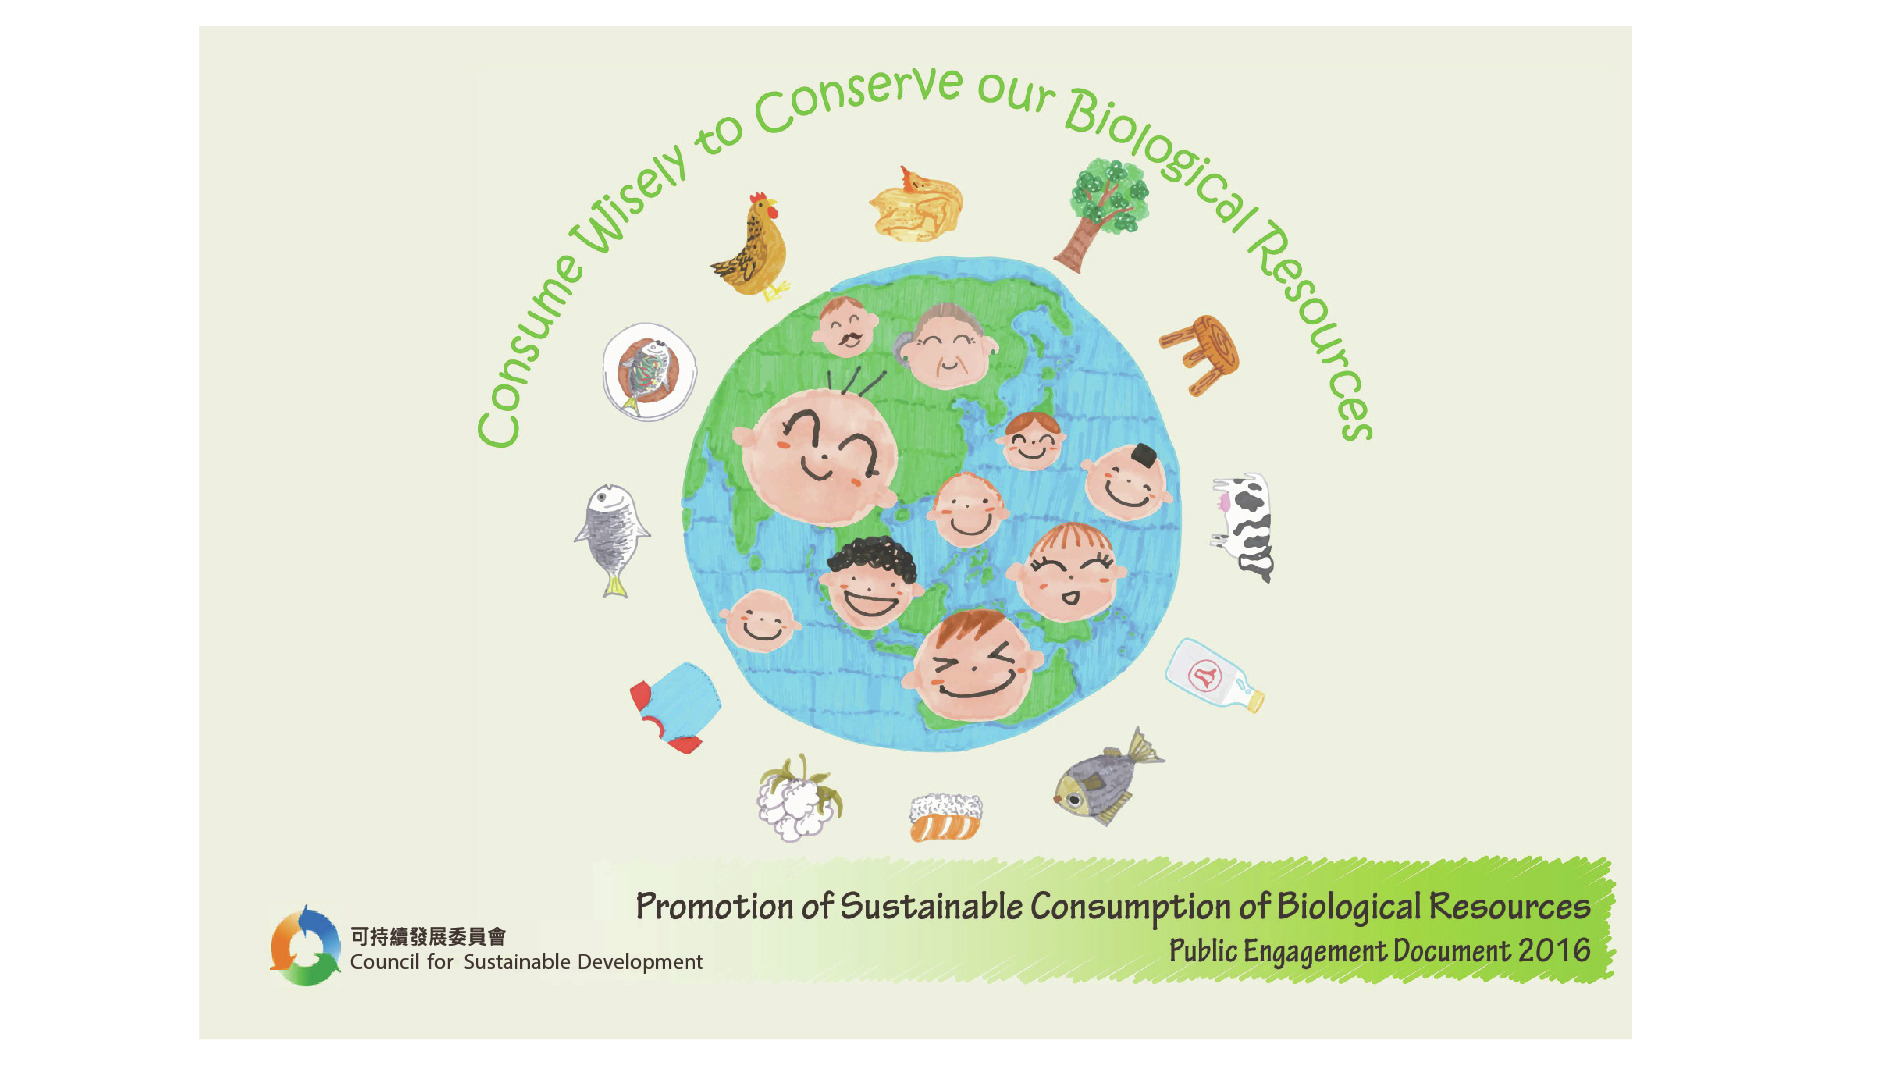 Promotion of Sustainable Consumption of Biological Resources